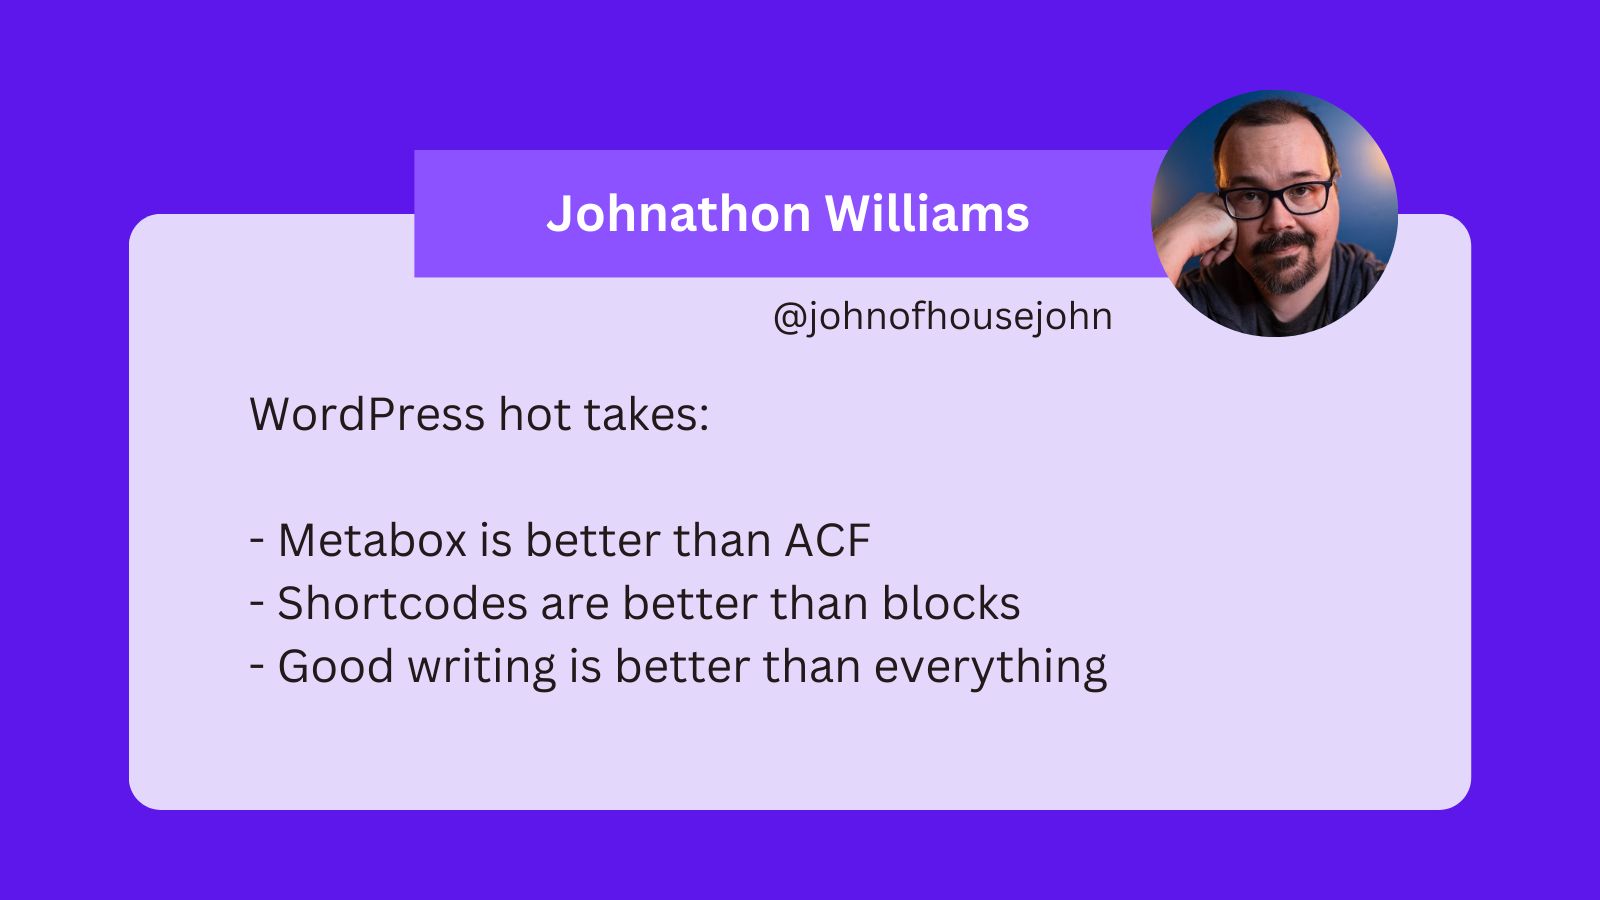 A tweet from Johnathon Williams that says WordPress hot takes: Metabox is better than ACF, shortcodes are better than blocks, good writing is better than everything.